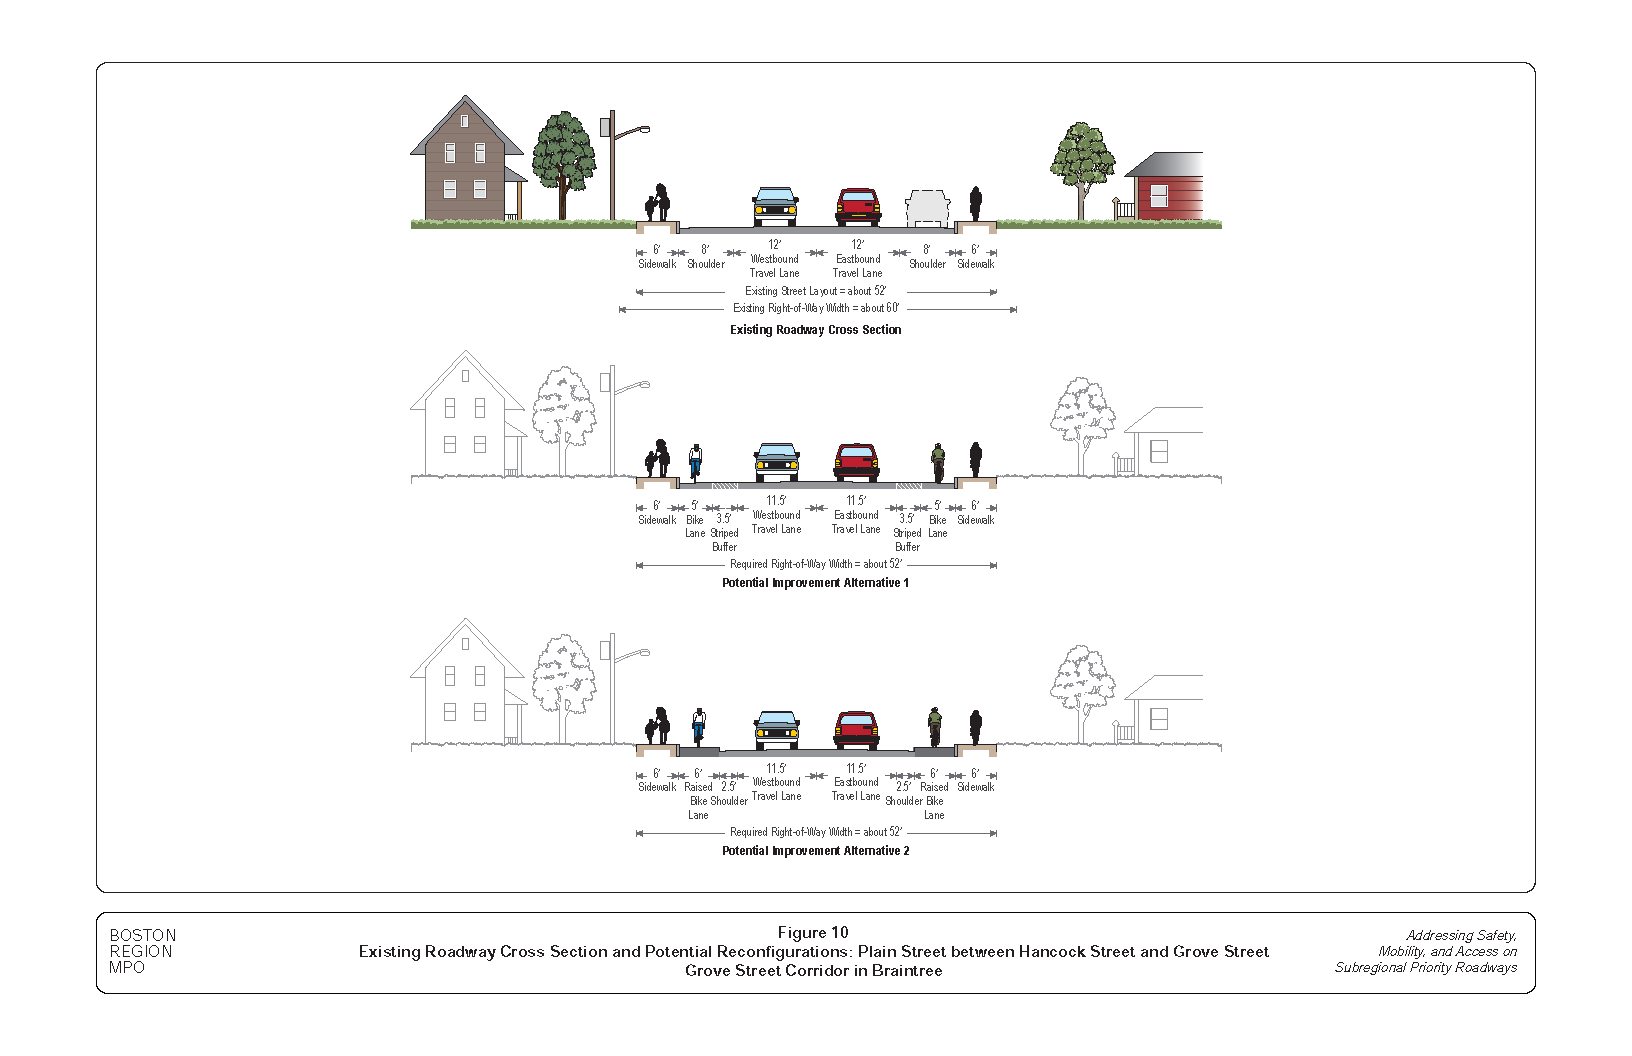 This figure shows the existing roadway cross section of Plain Street between Hancock Street and Grove Street and potential reconfiguration alternatives to accommodate all users of the roadway, including people who walk and bike.